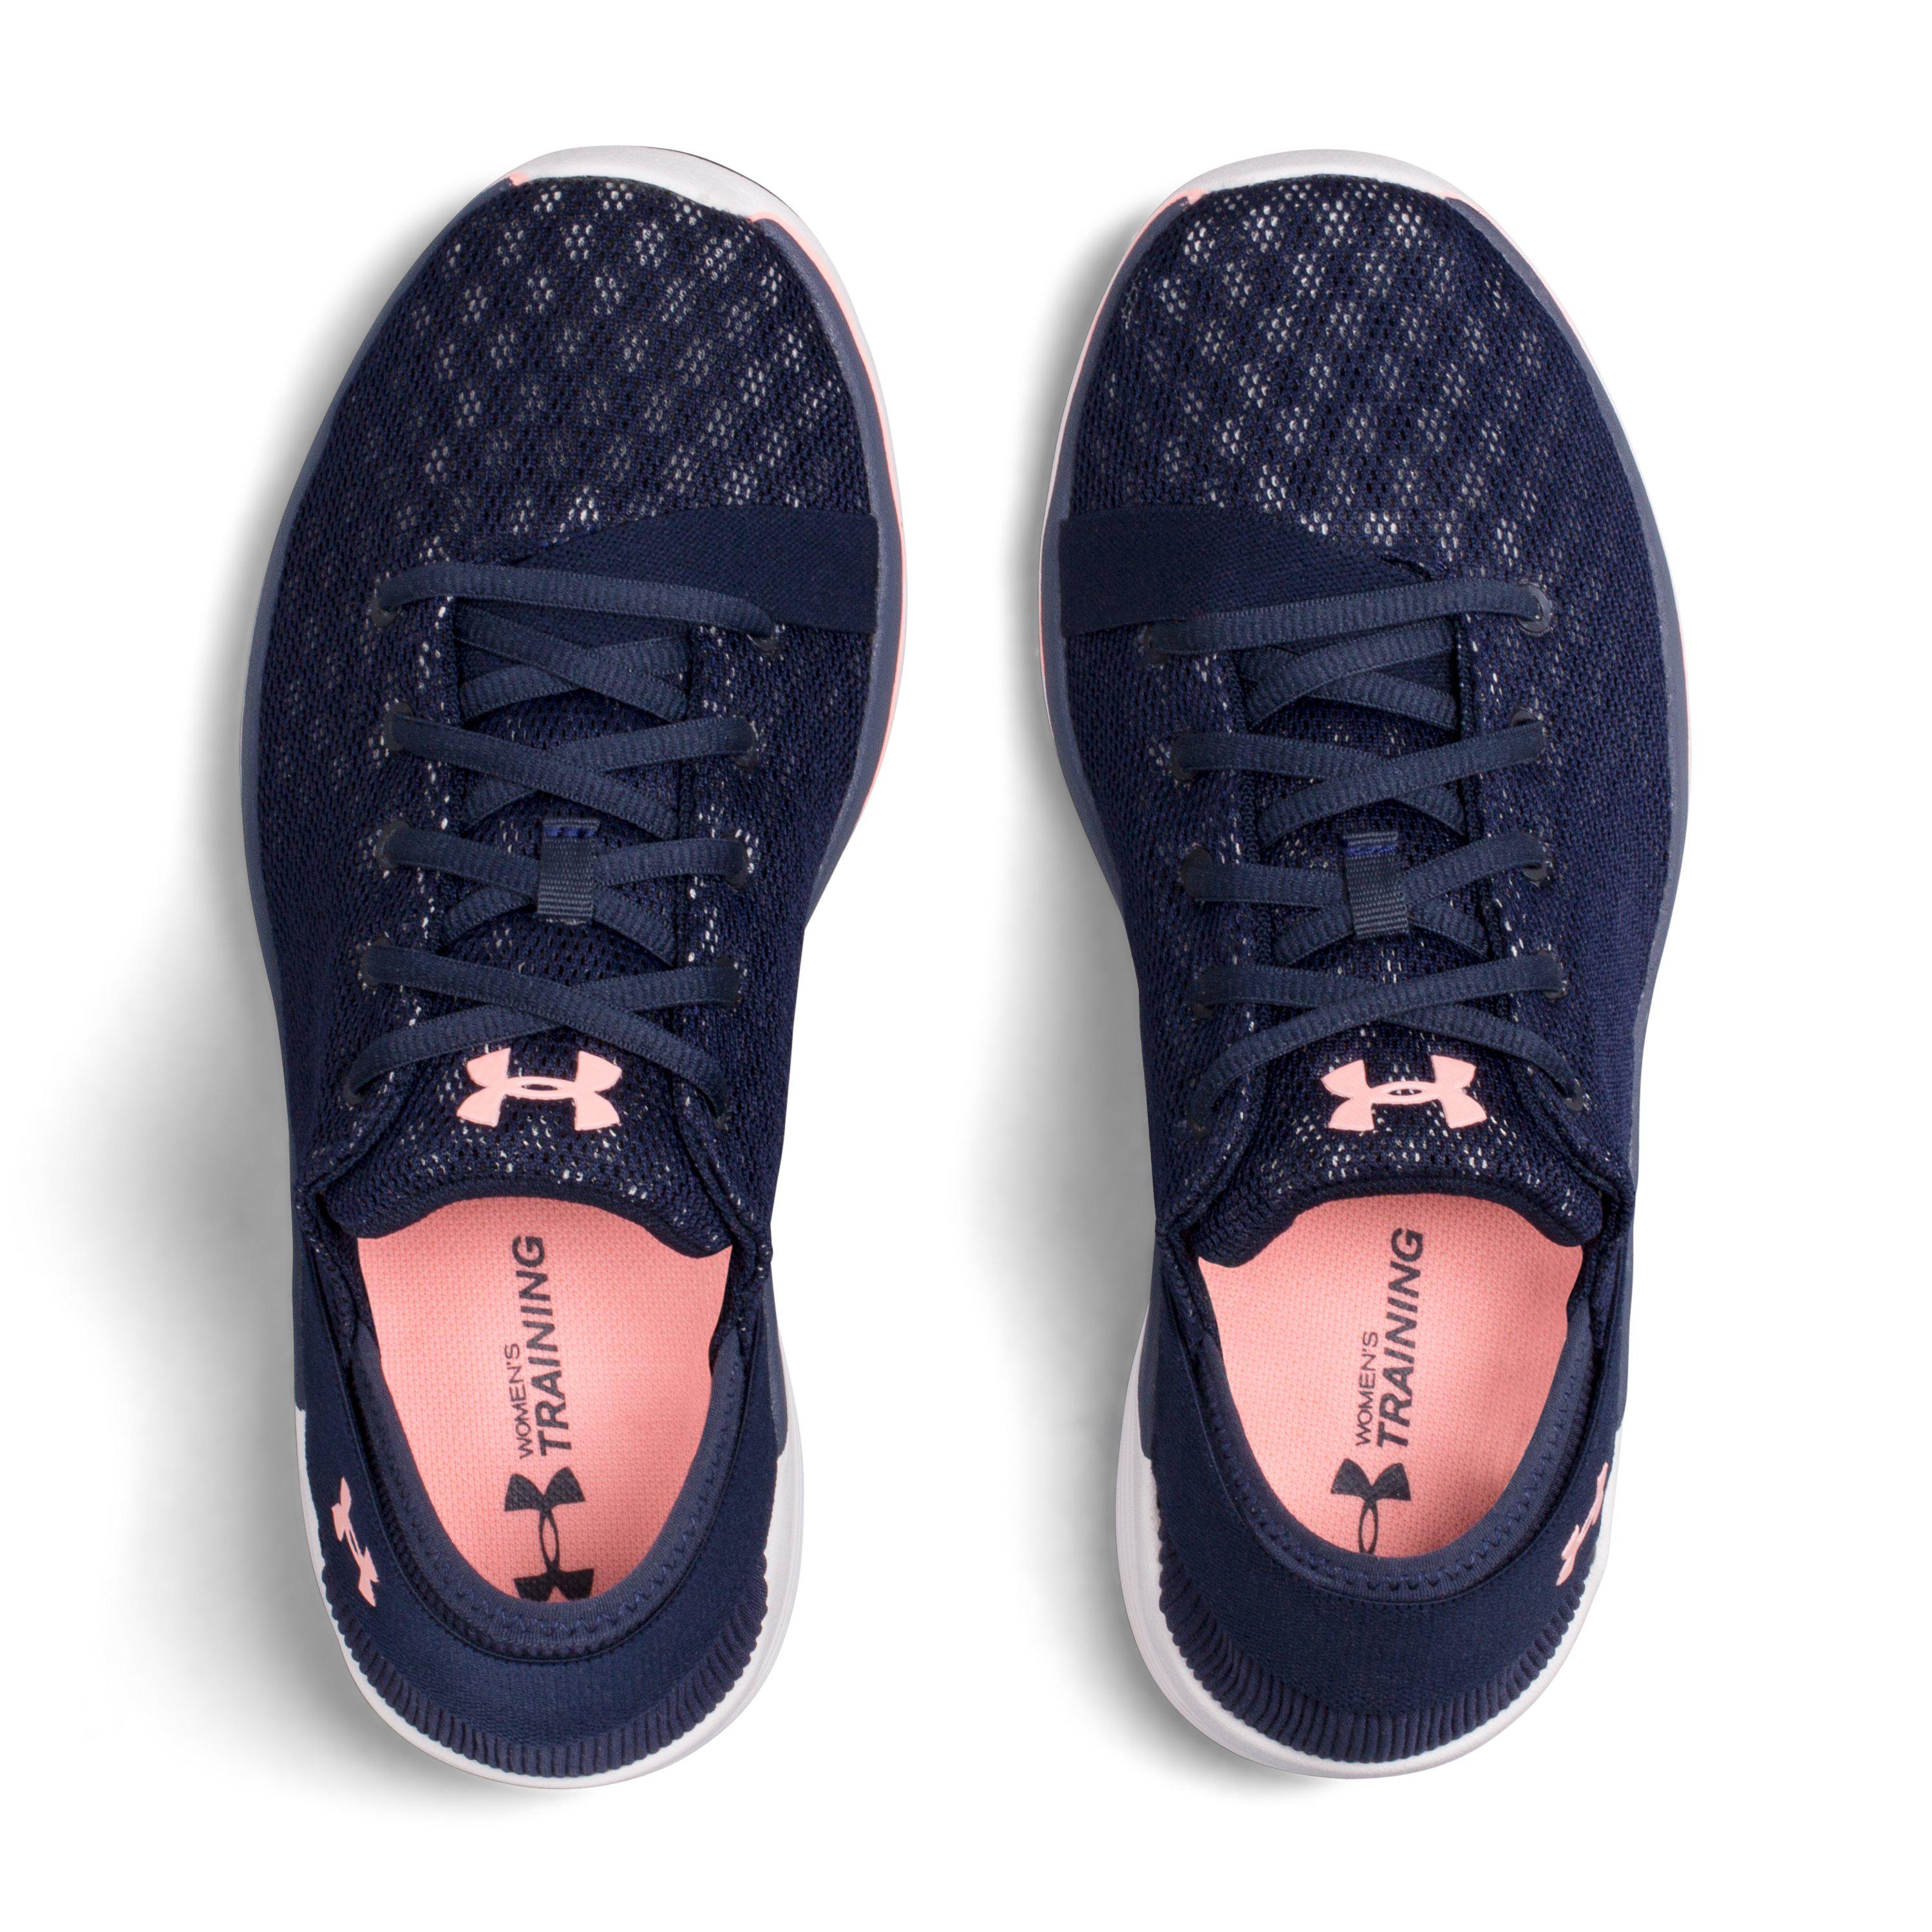 Under Armour Women's Ua Rotation Training Shoes in Blue